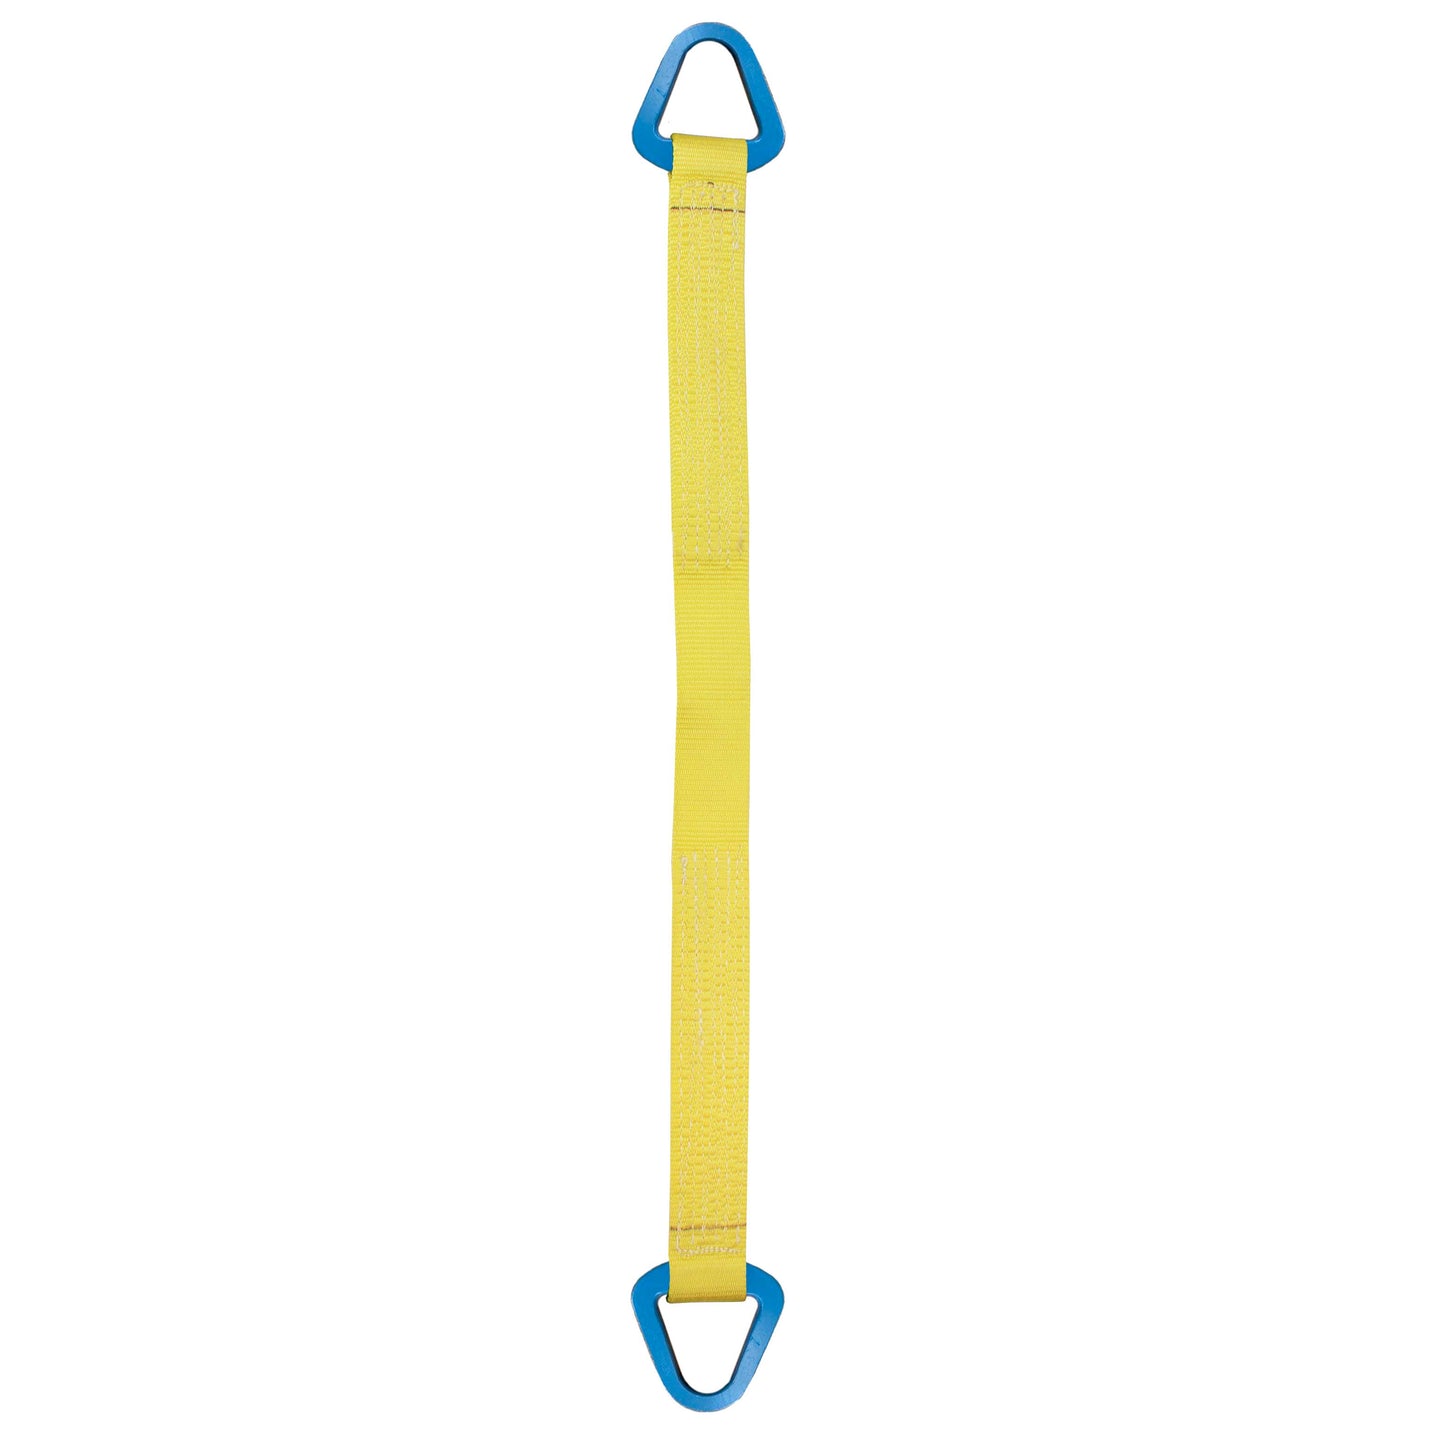 Nylon Lifting Sling Triangle 4 inch x 8 foot 2ply image 1 of 2